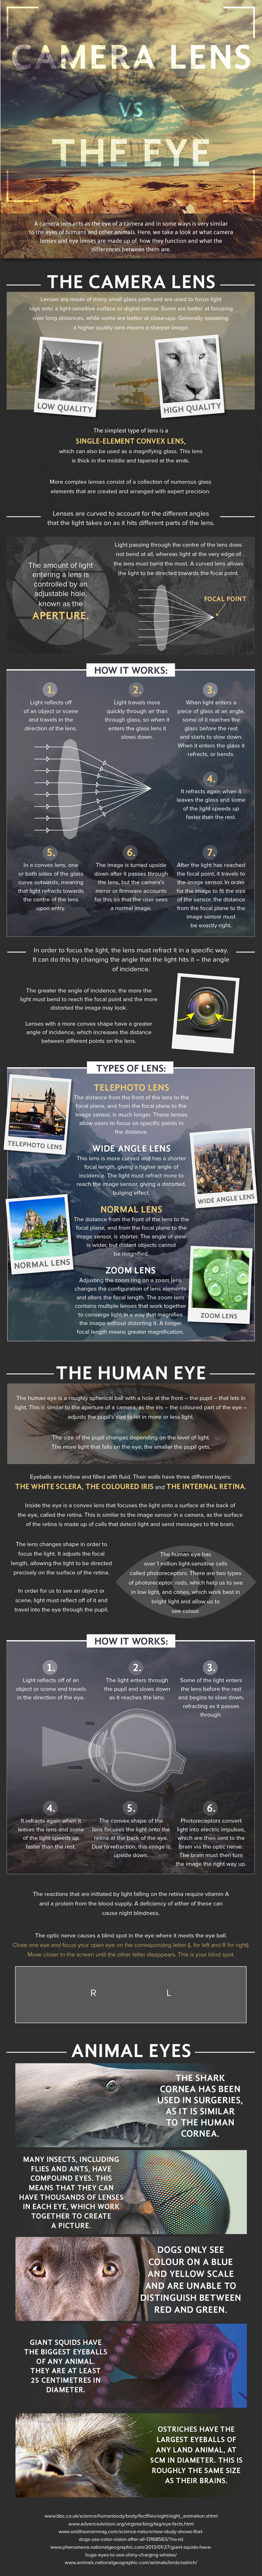 What type of "lens" is the human eye? | Mediaworks / Clifton Cameras